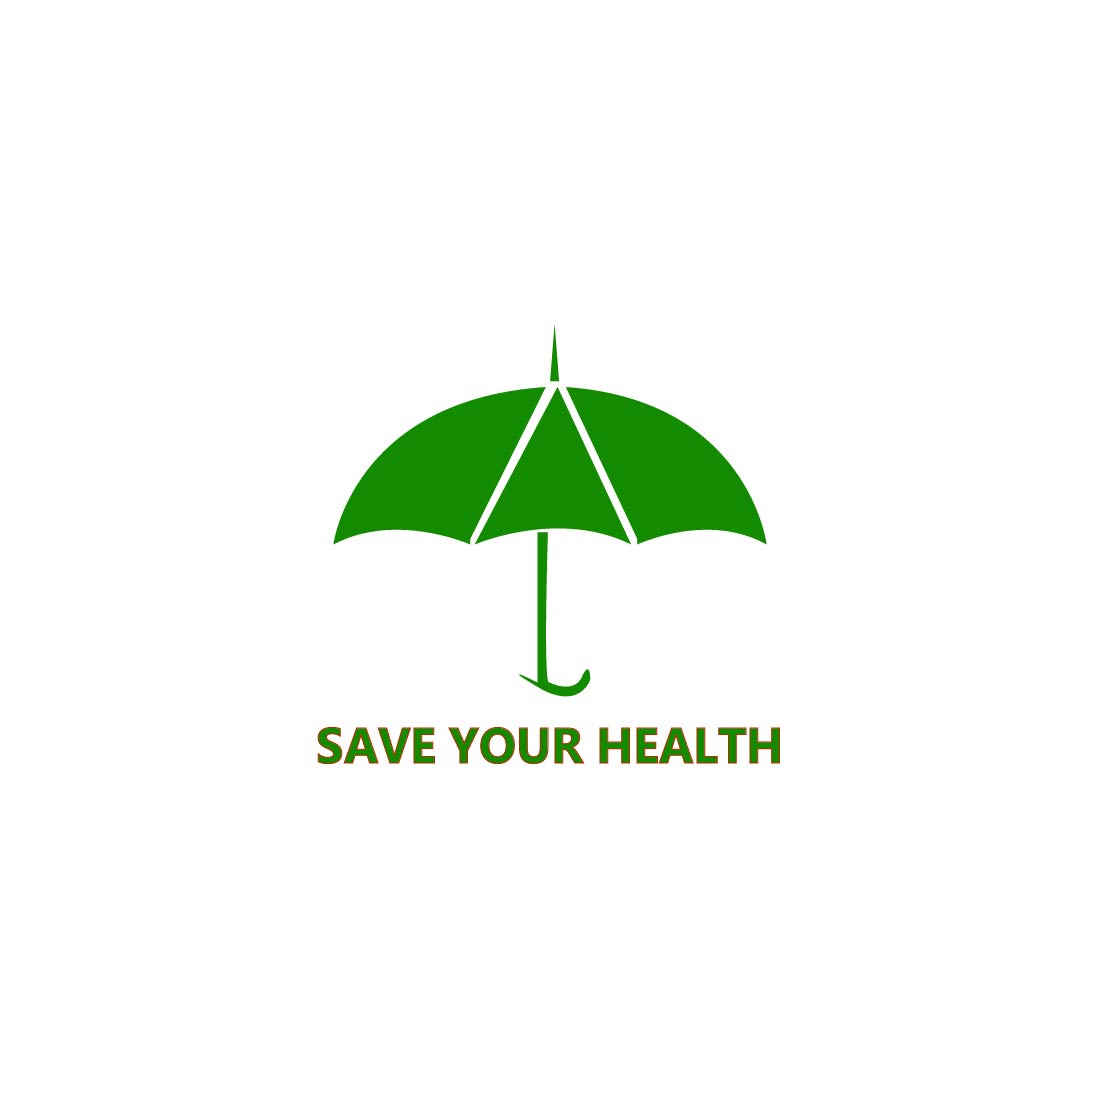 SAVE YOUR HEALTH cover image.